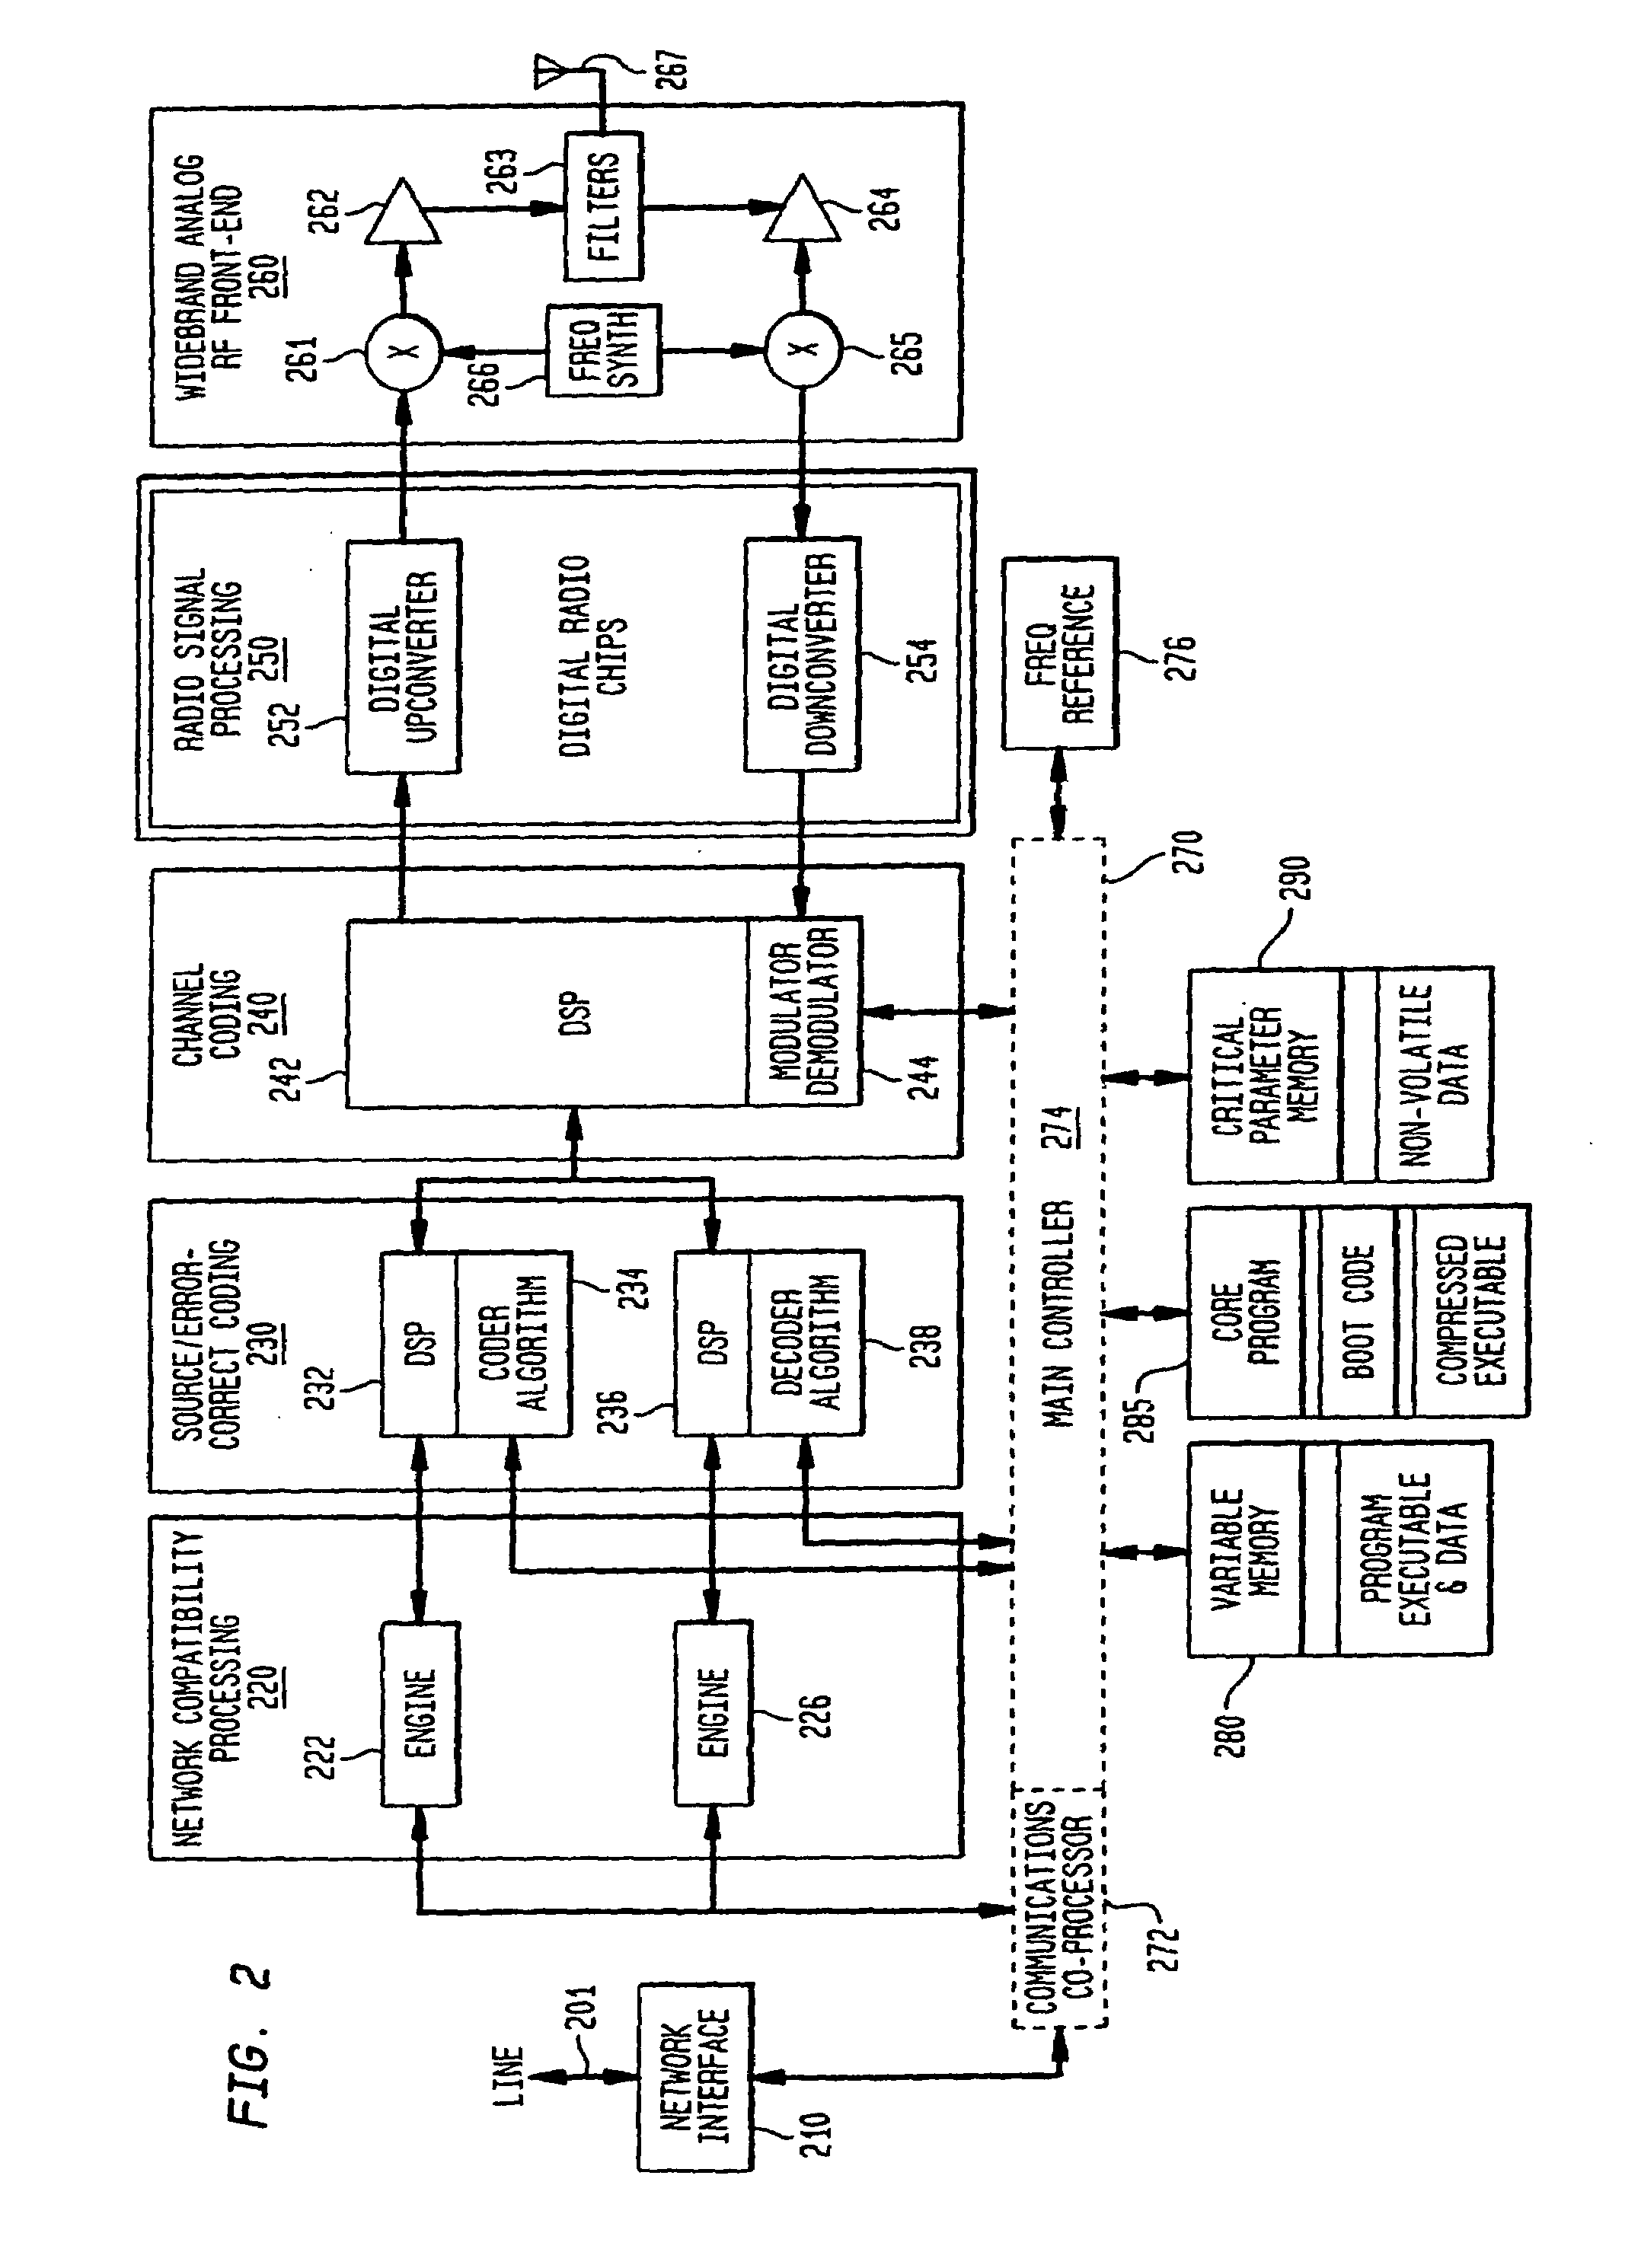 Method and apparatus for over-the-air activation of neighborhood cordless-type services